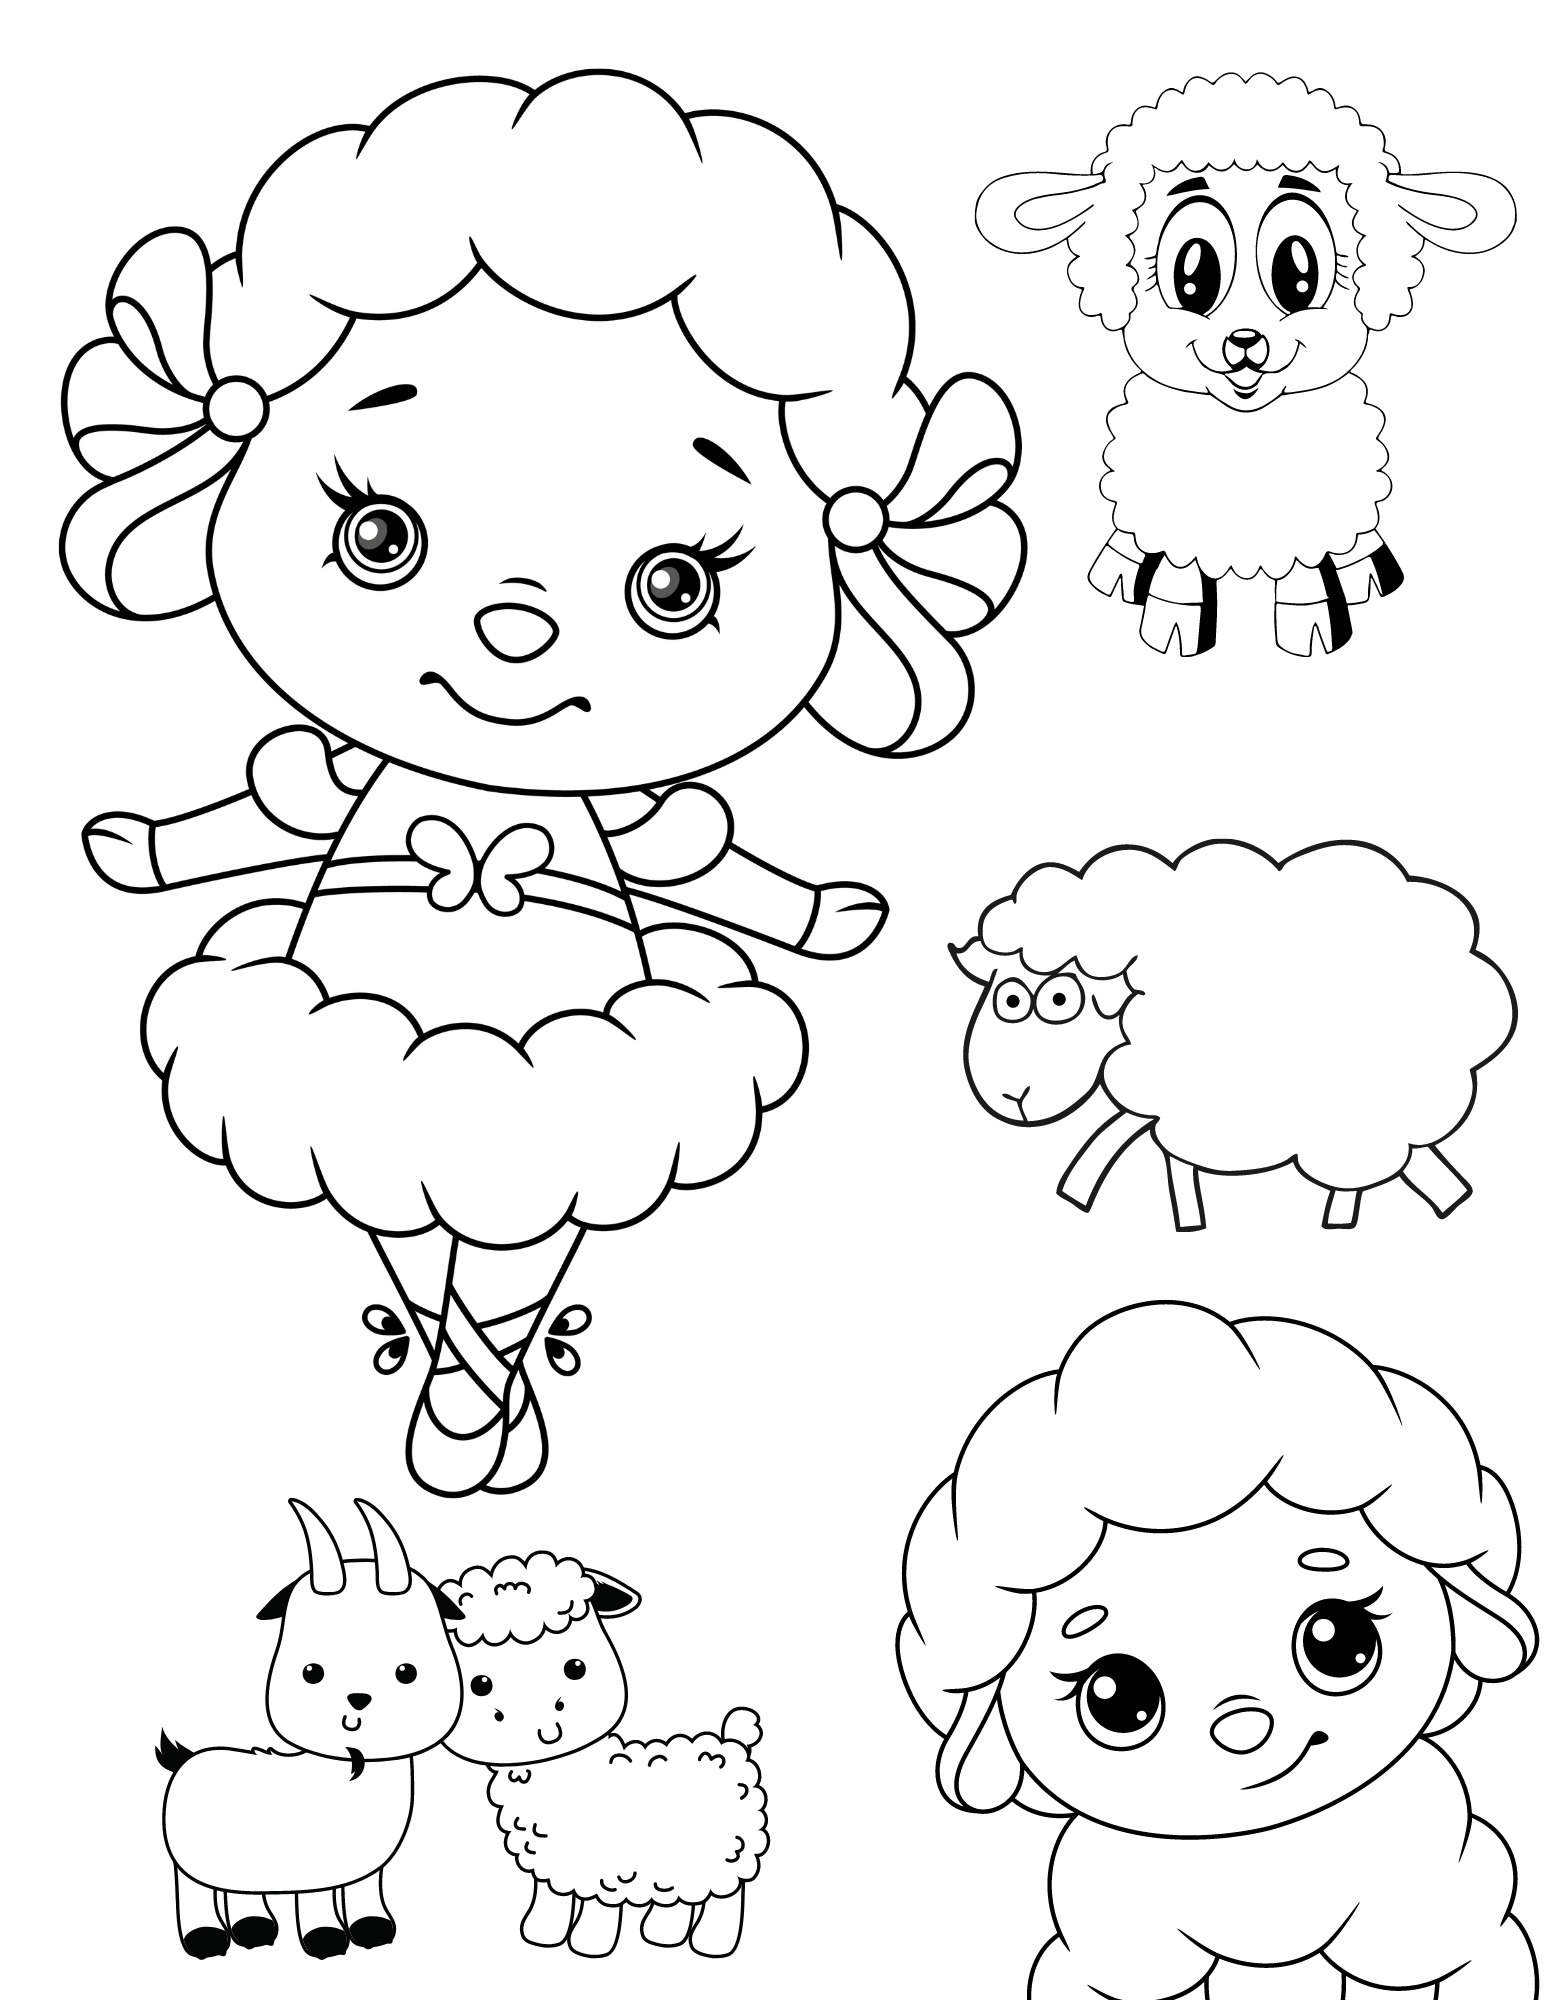 Superb sheep coloring pages for kids and adults